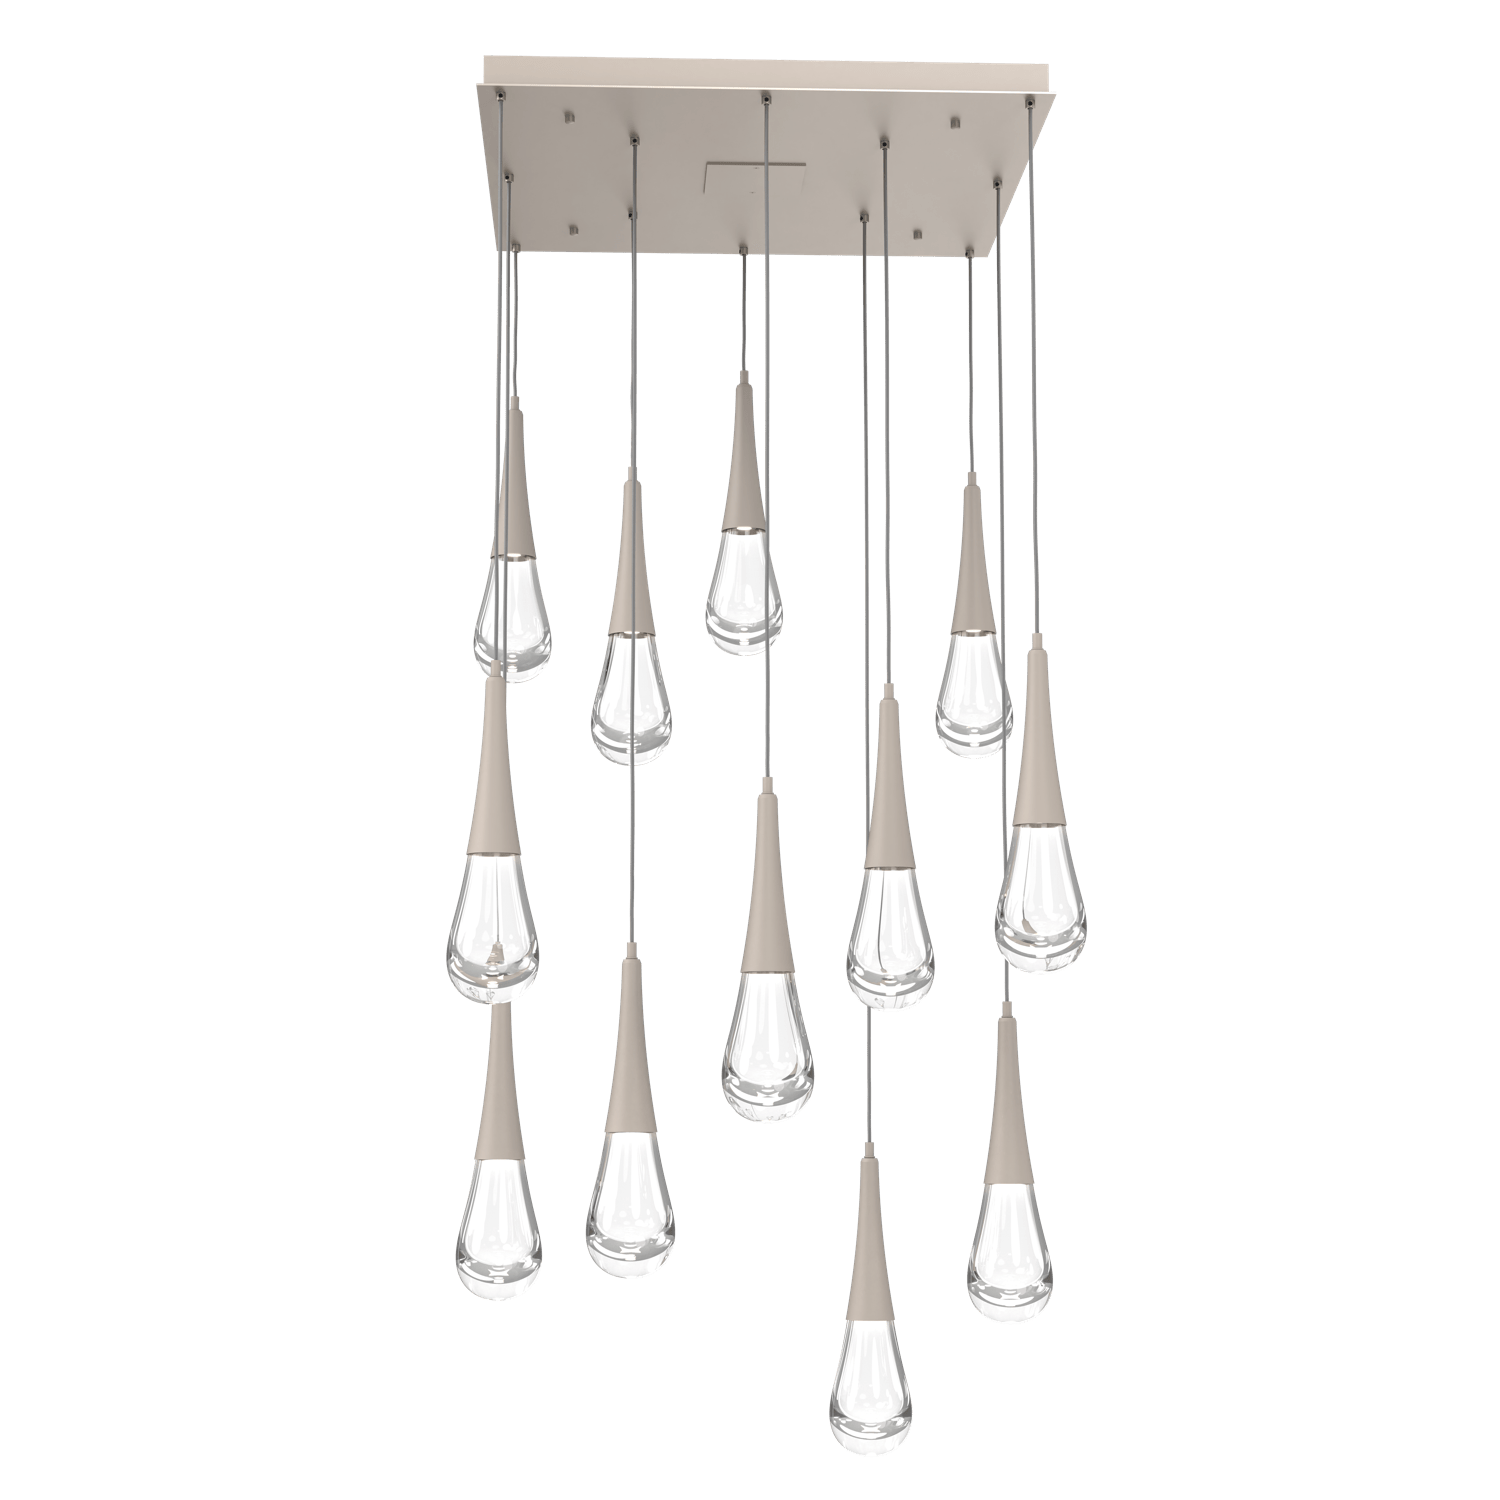 CHB0078-12-BS-Hammerton-Studio-Raindrop-12-light-square-pendant-chandelier-with-metallic-beige-silver-finish-and-clear-blown-glass-shades-and-LED-lamping